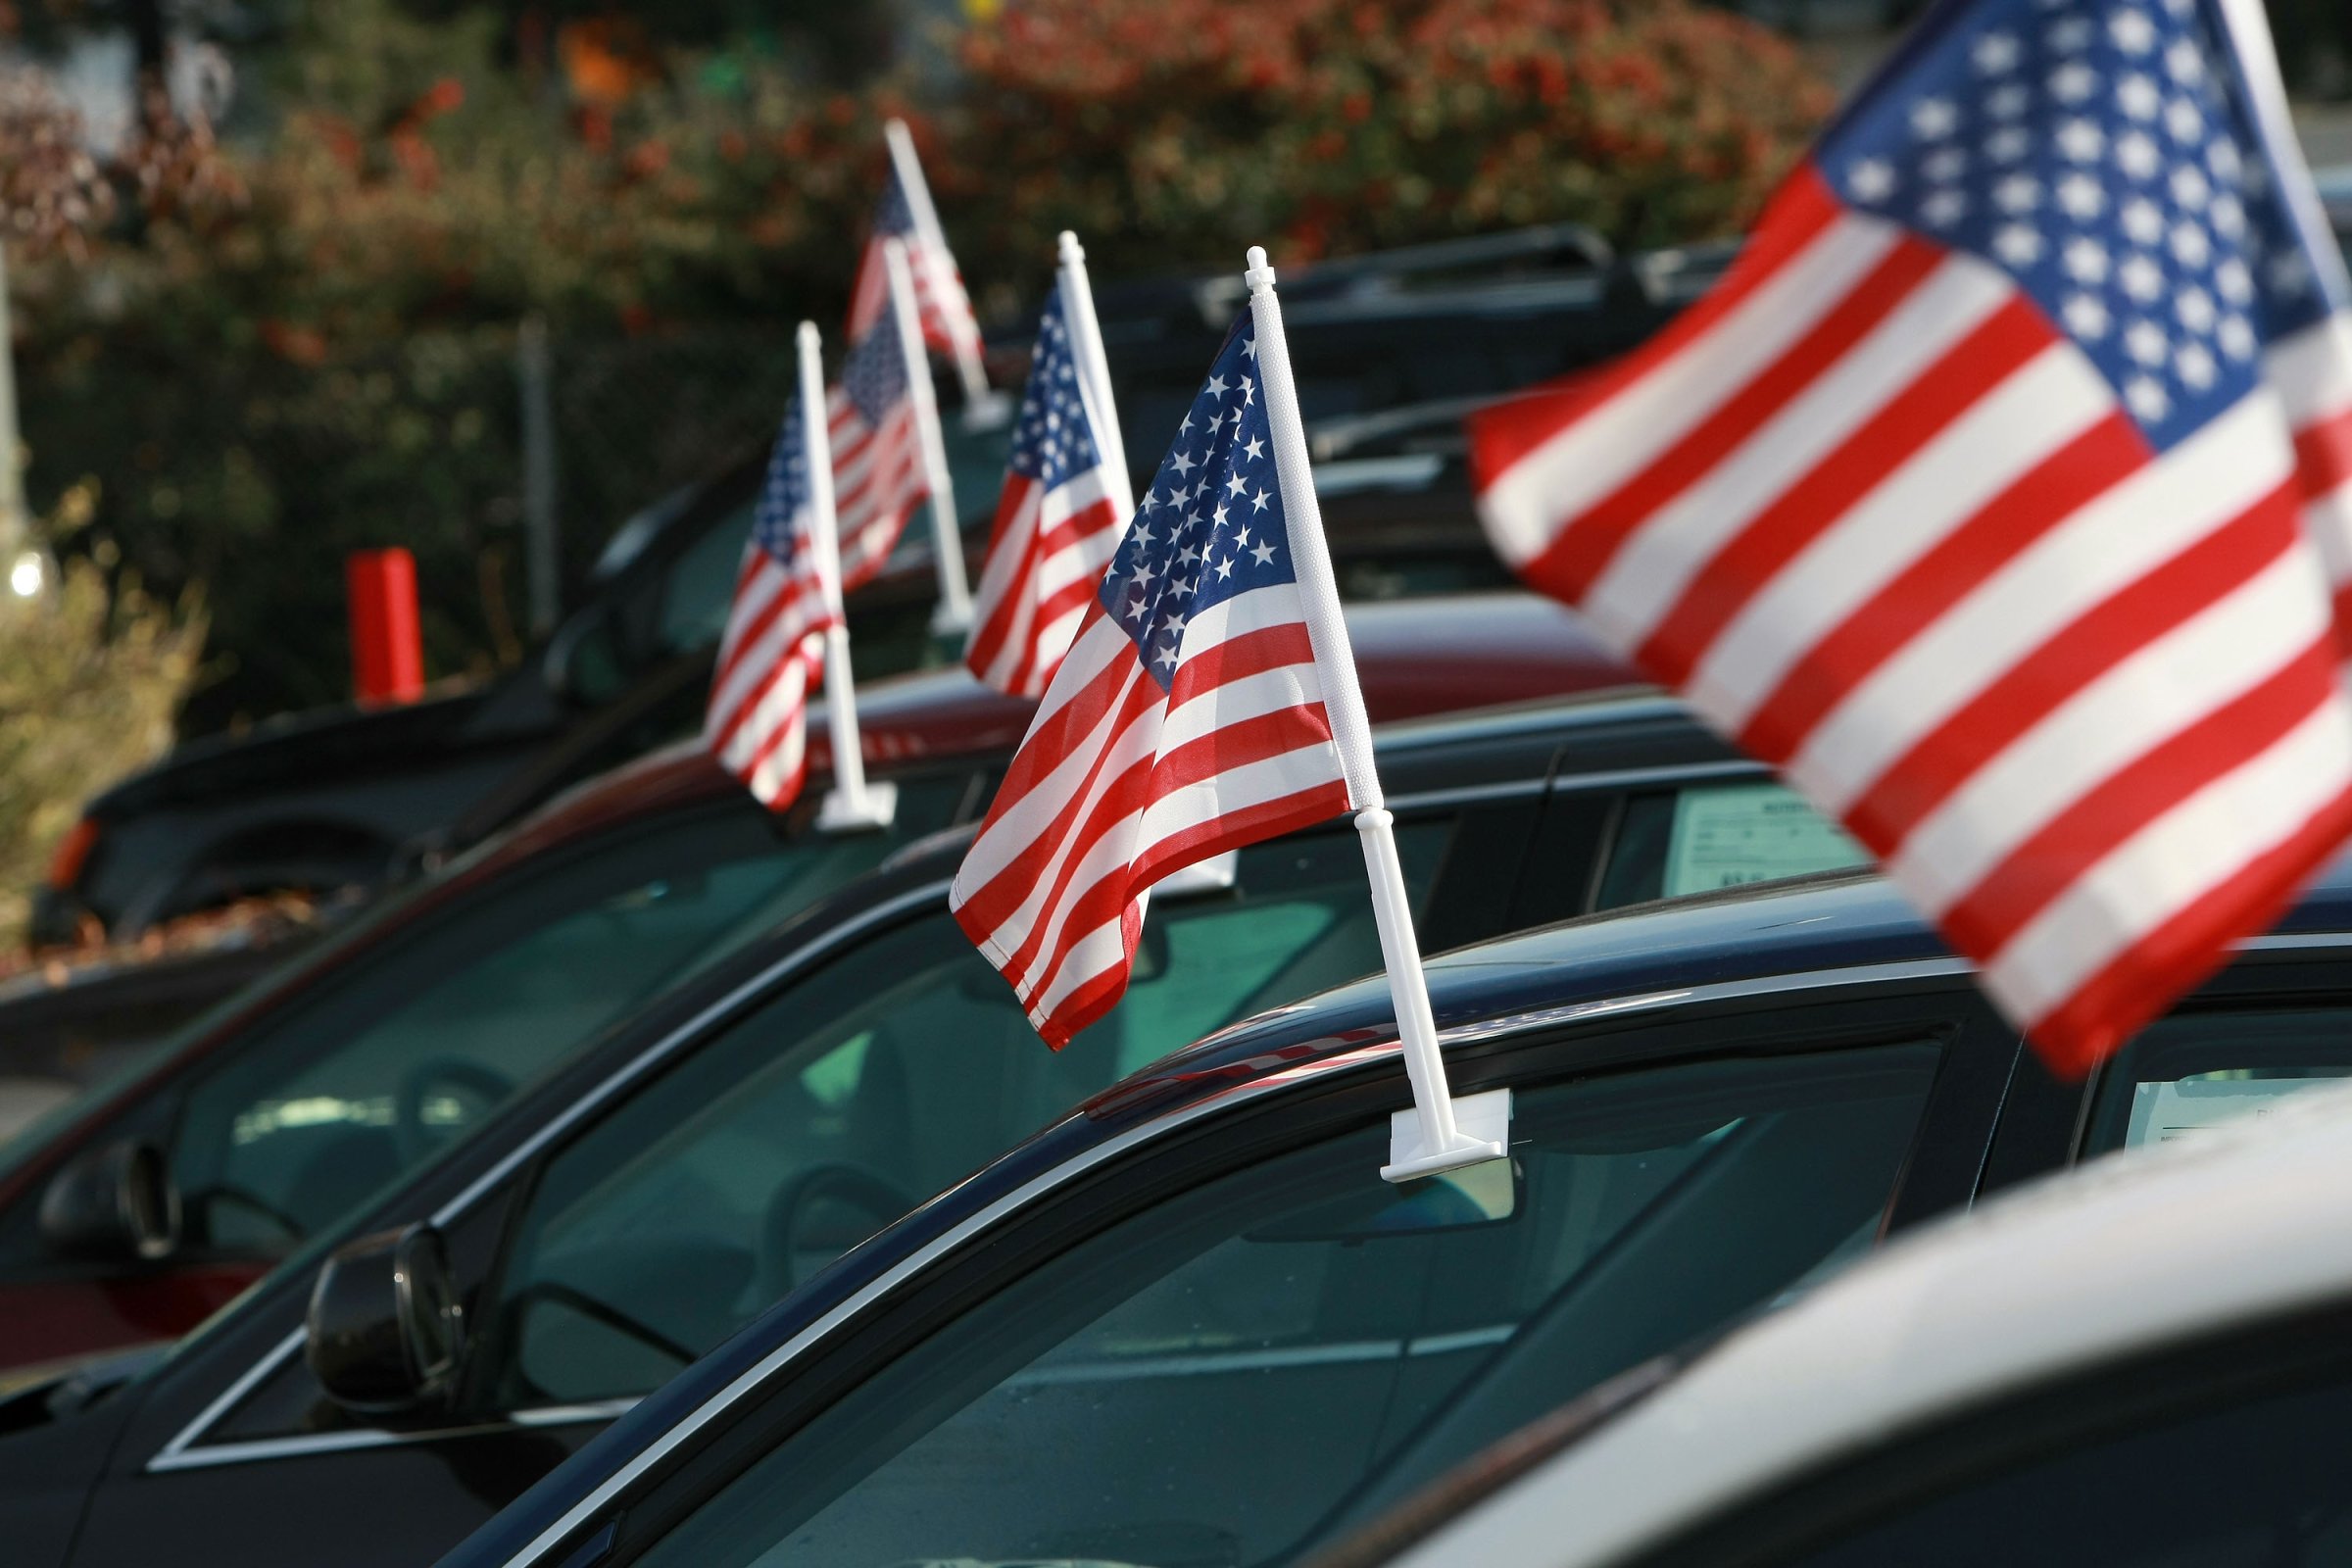 Auto Dealerships Fate In Question As Bailout Fails In Senate Vote